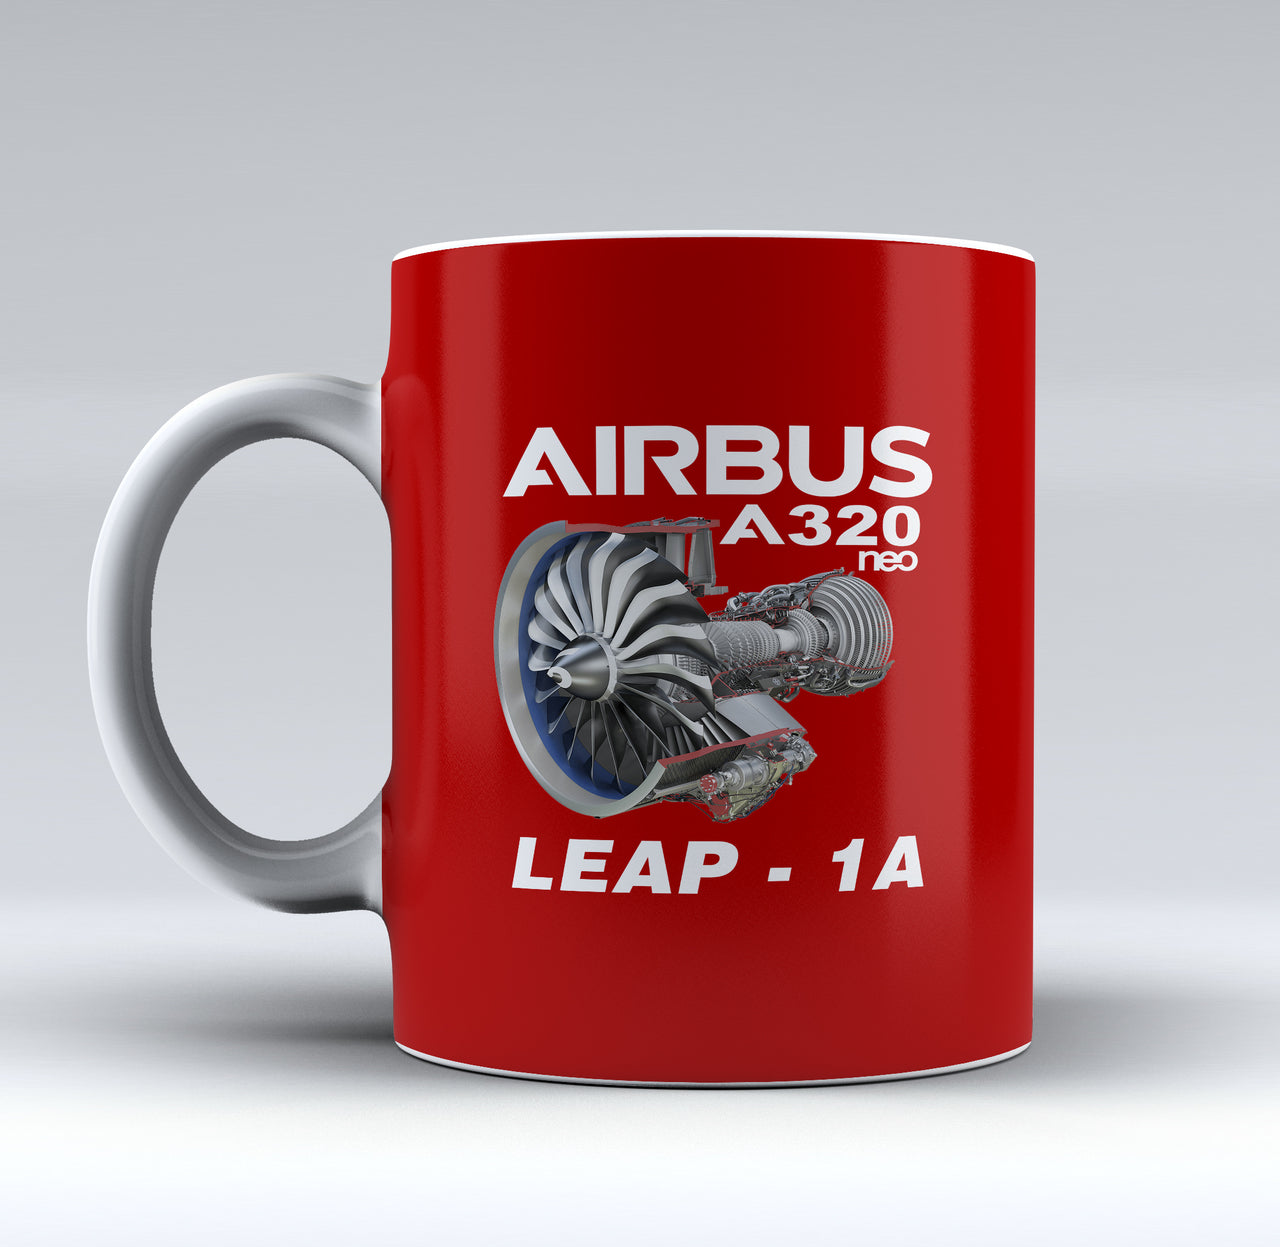 Airbus A320neo & Leap 1A Engine Designed Mugs